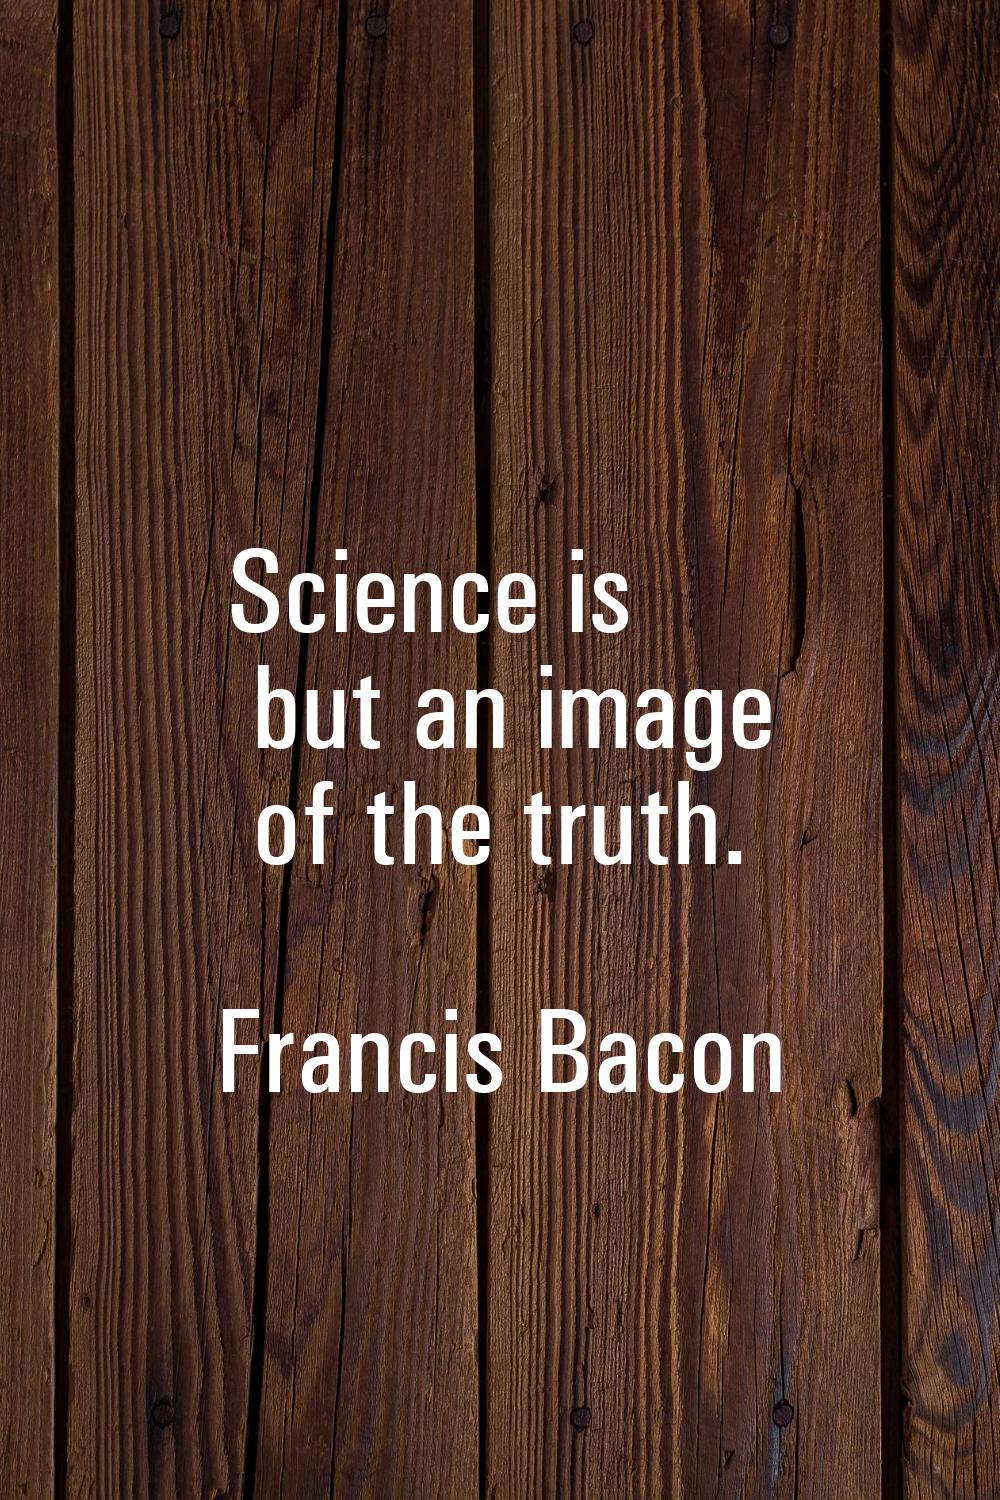 Science is but an image of the truth.